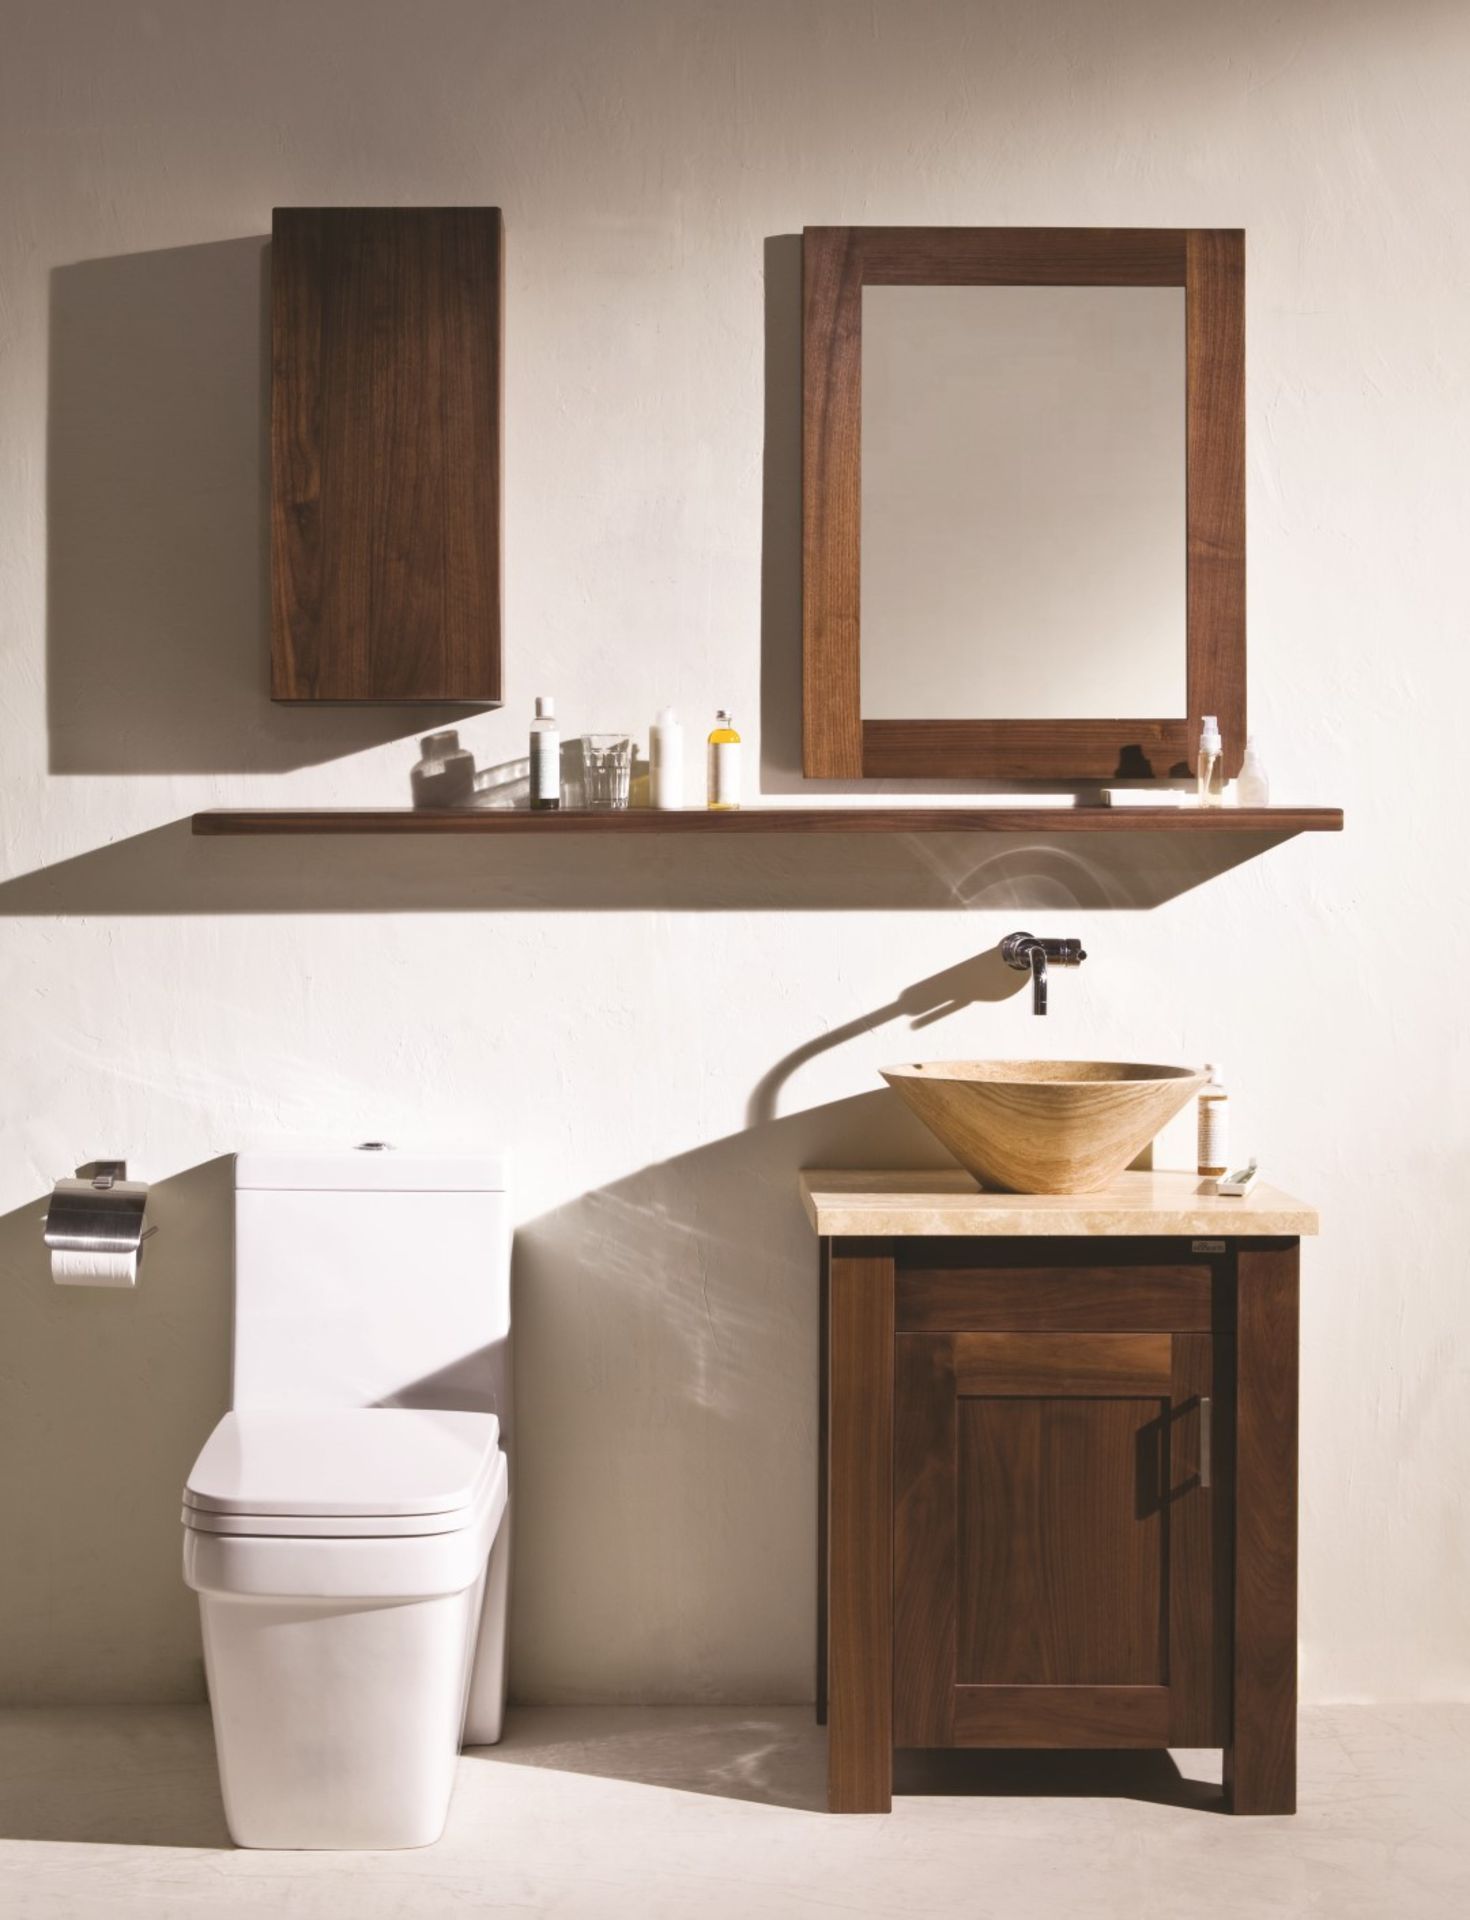 1 x Stonearth Bathroom Storage Shelf With Concealed Brackets - American Solid Walnut - Size: 1200mm - Image 4 of 12